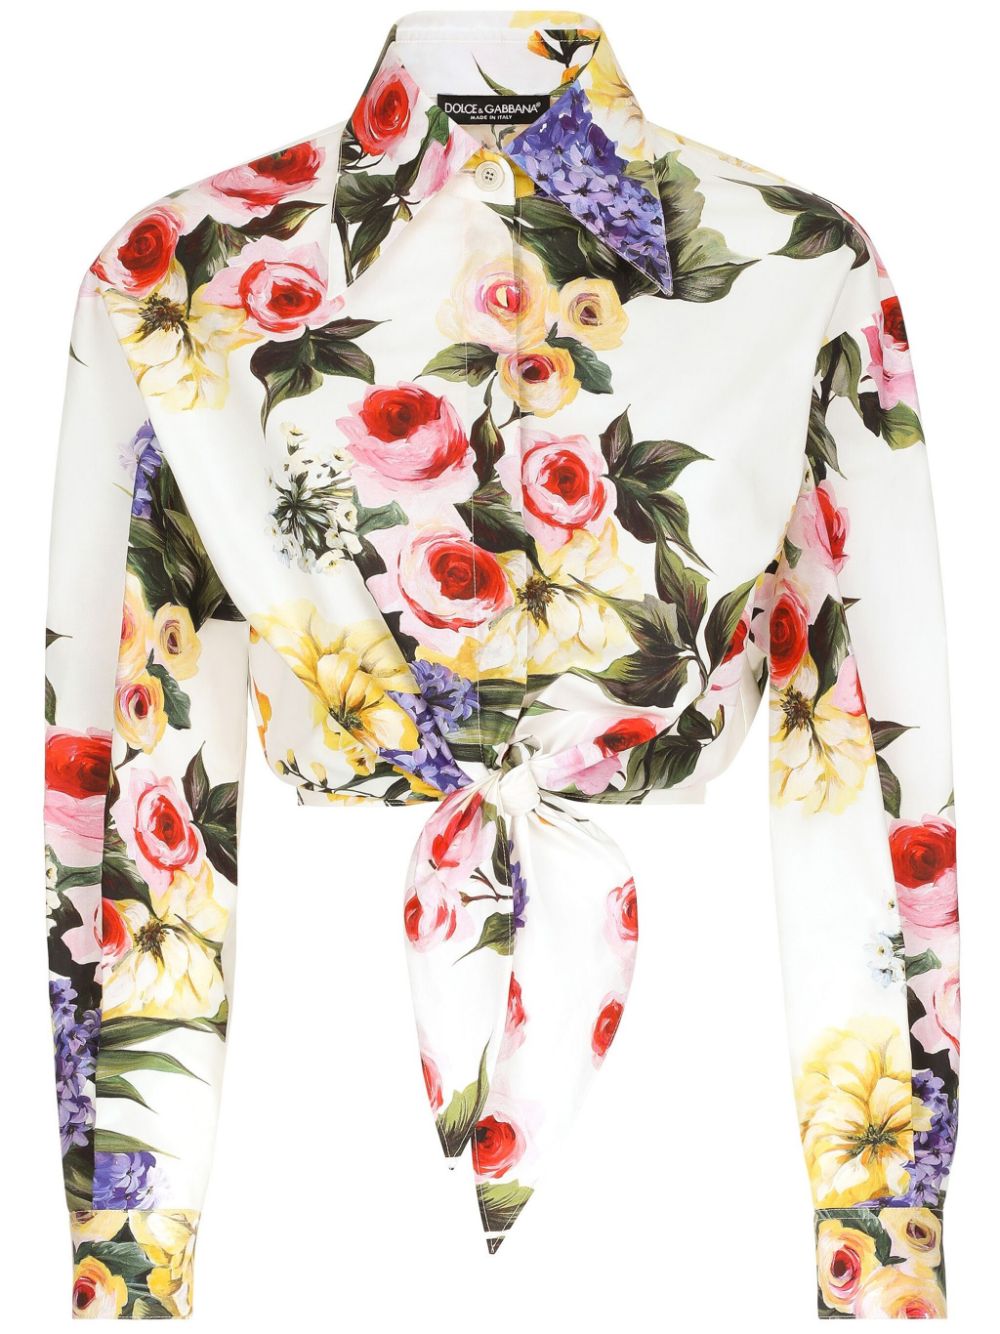 DOLCE & GABBANA Floral Print Cotton Blouse with Decorative Front Knot